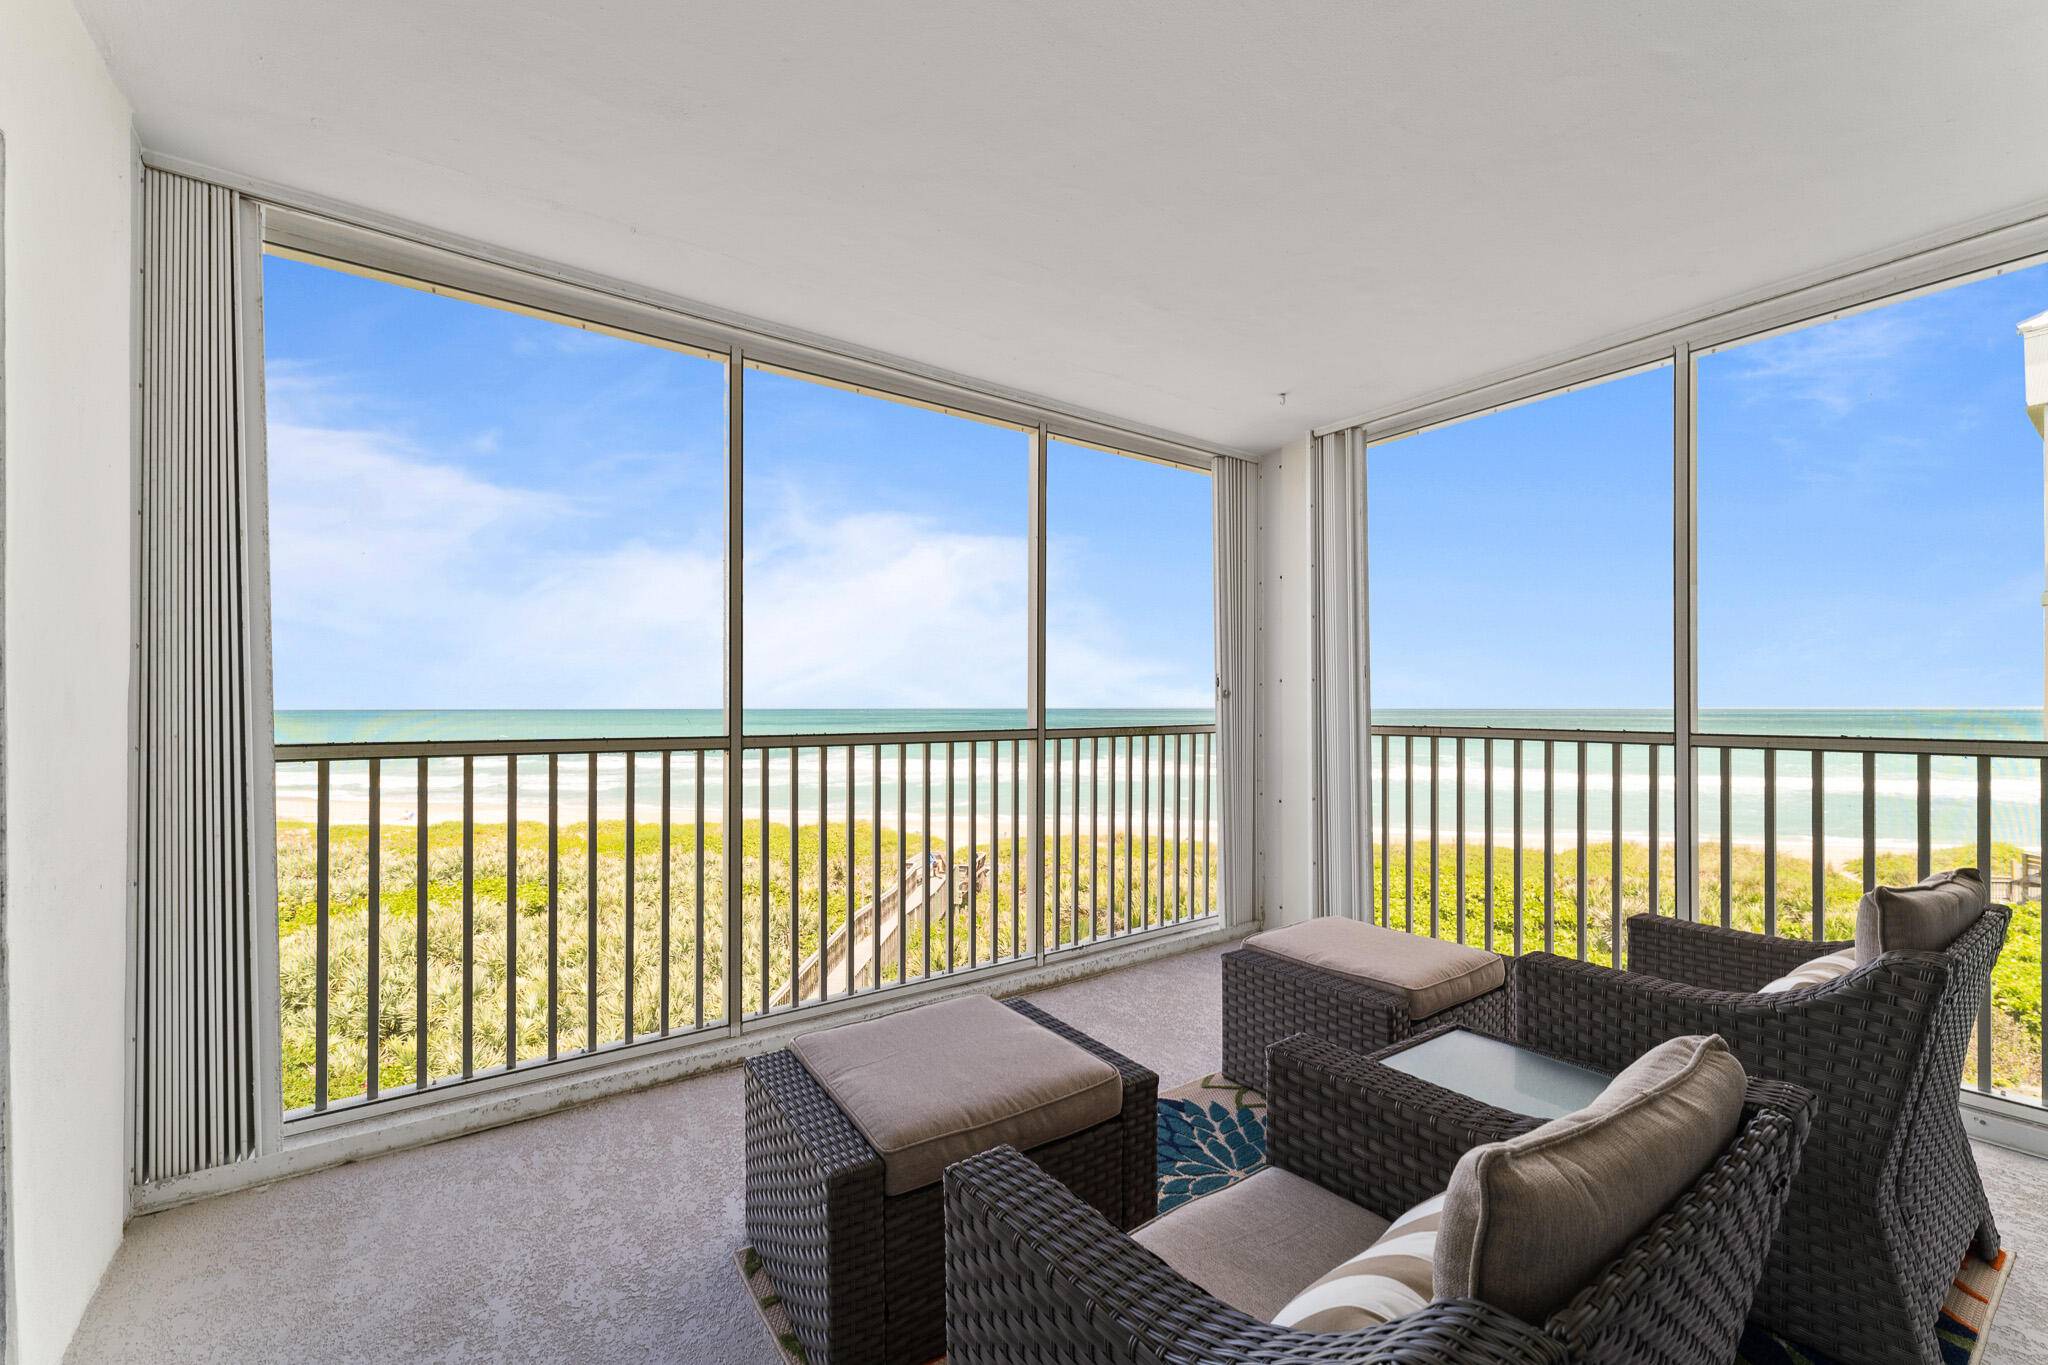 COMPLETELY RENOVATED 2 Bedroom two bath condo with an open balcony on two sides for wide water ocean views.